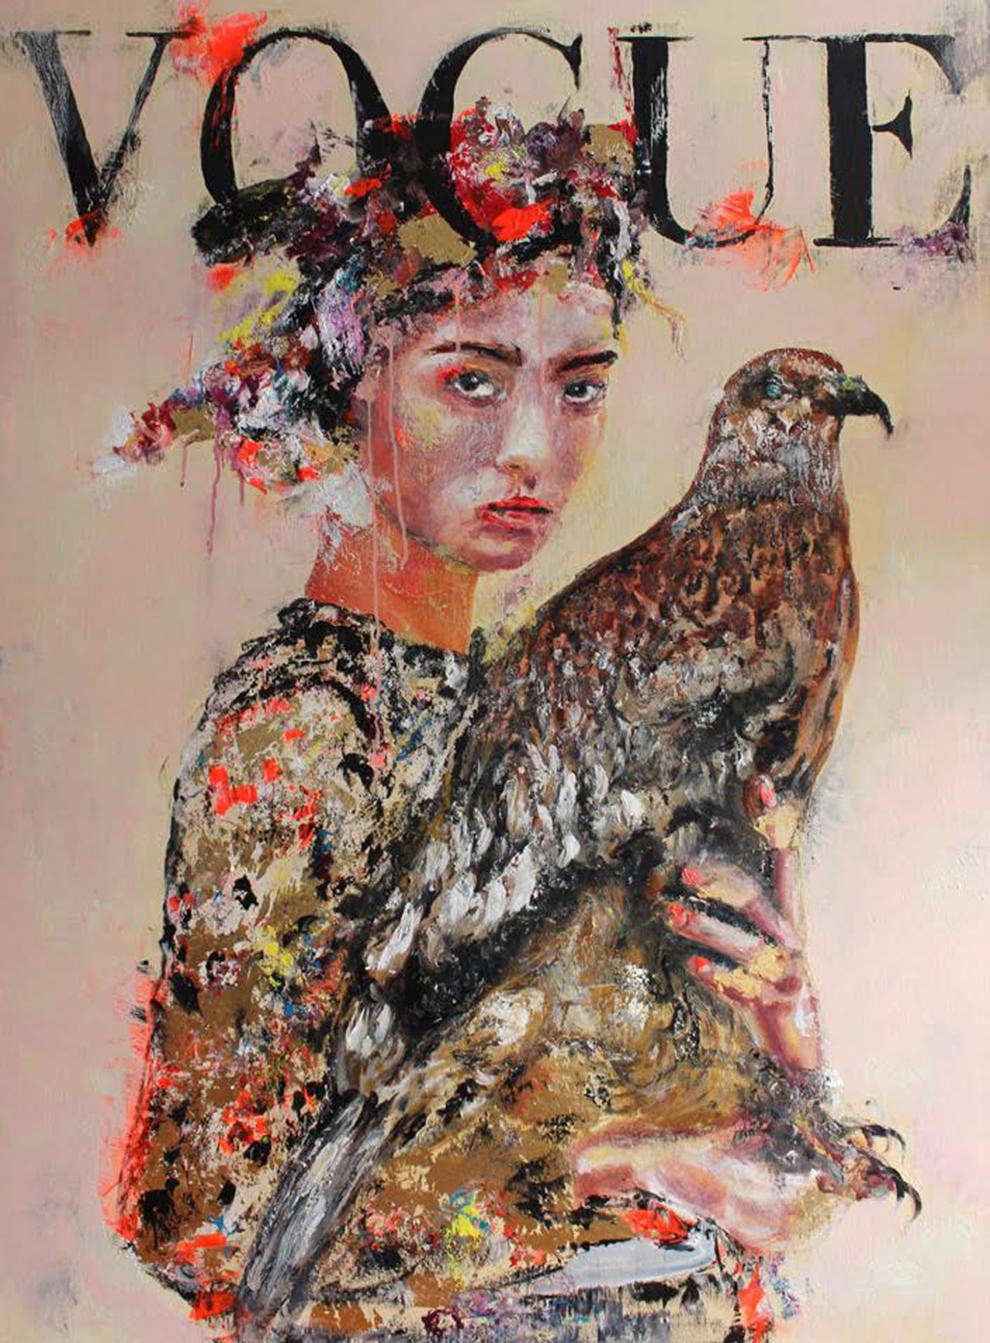 Astrid Stöfhas Figurative Painting - The Falcon Hairstyle Portrait - Vogue Fashion inspired figurative painting